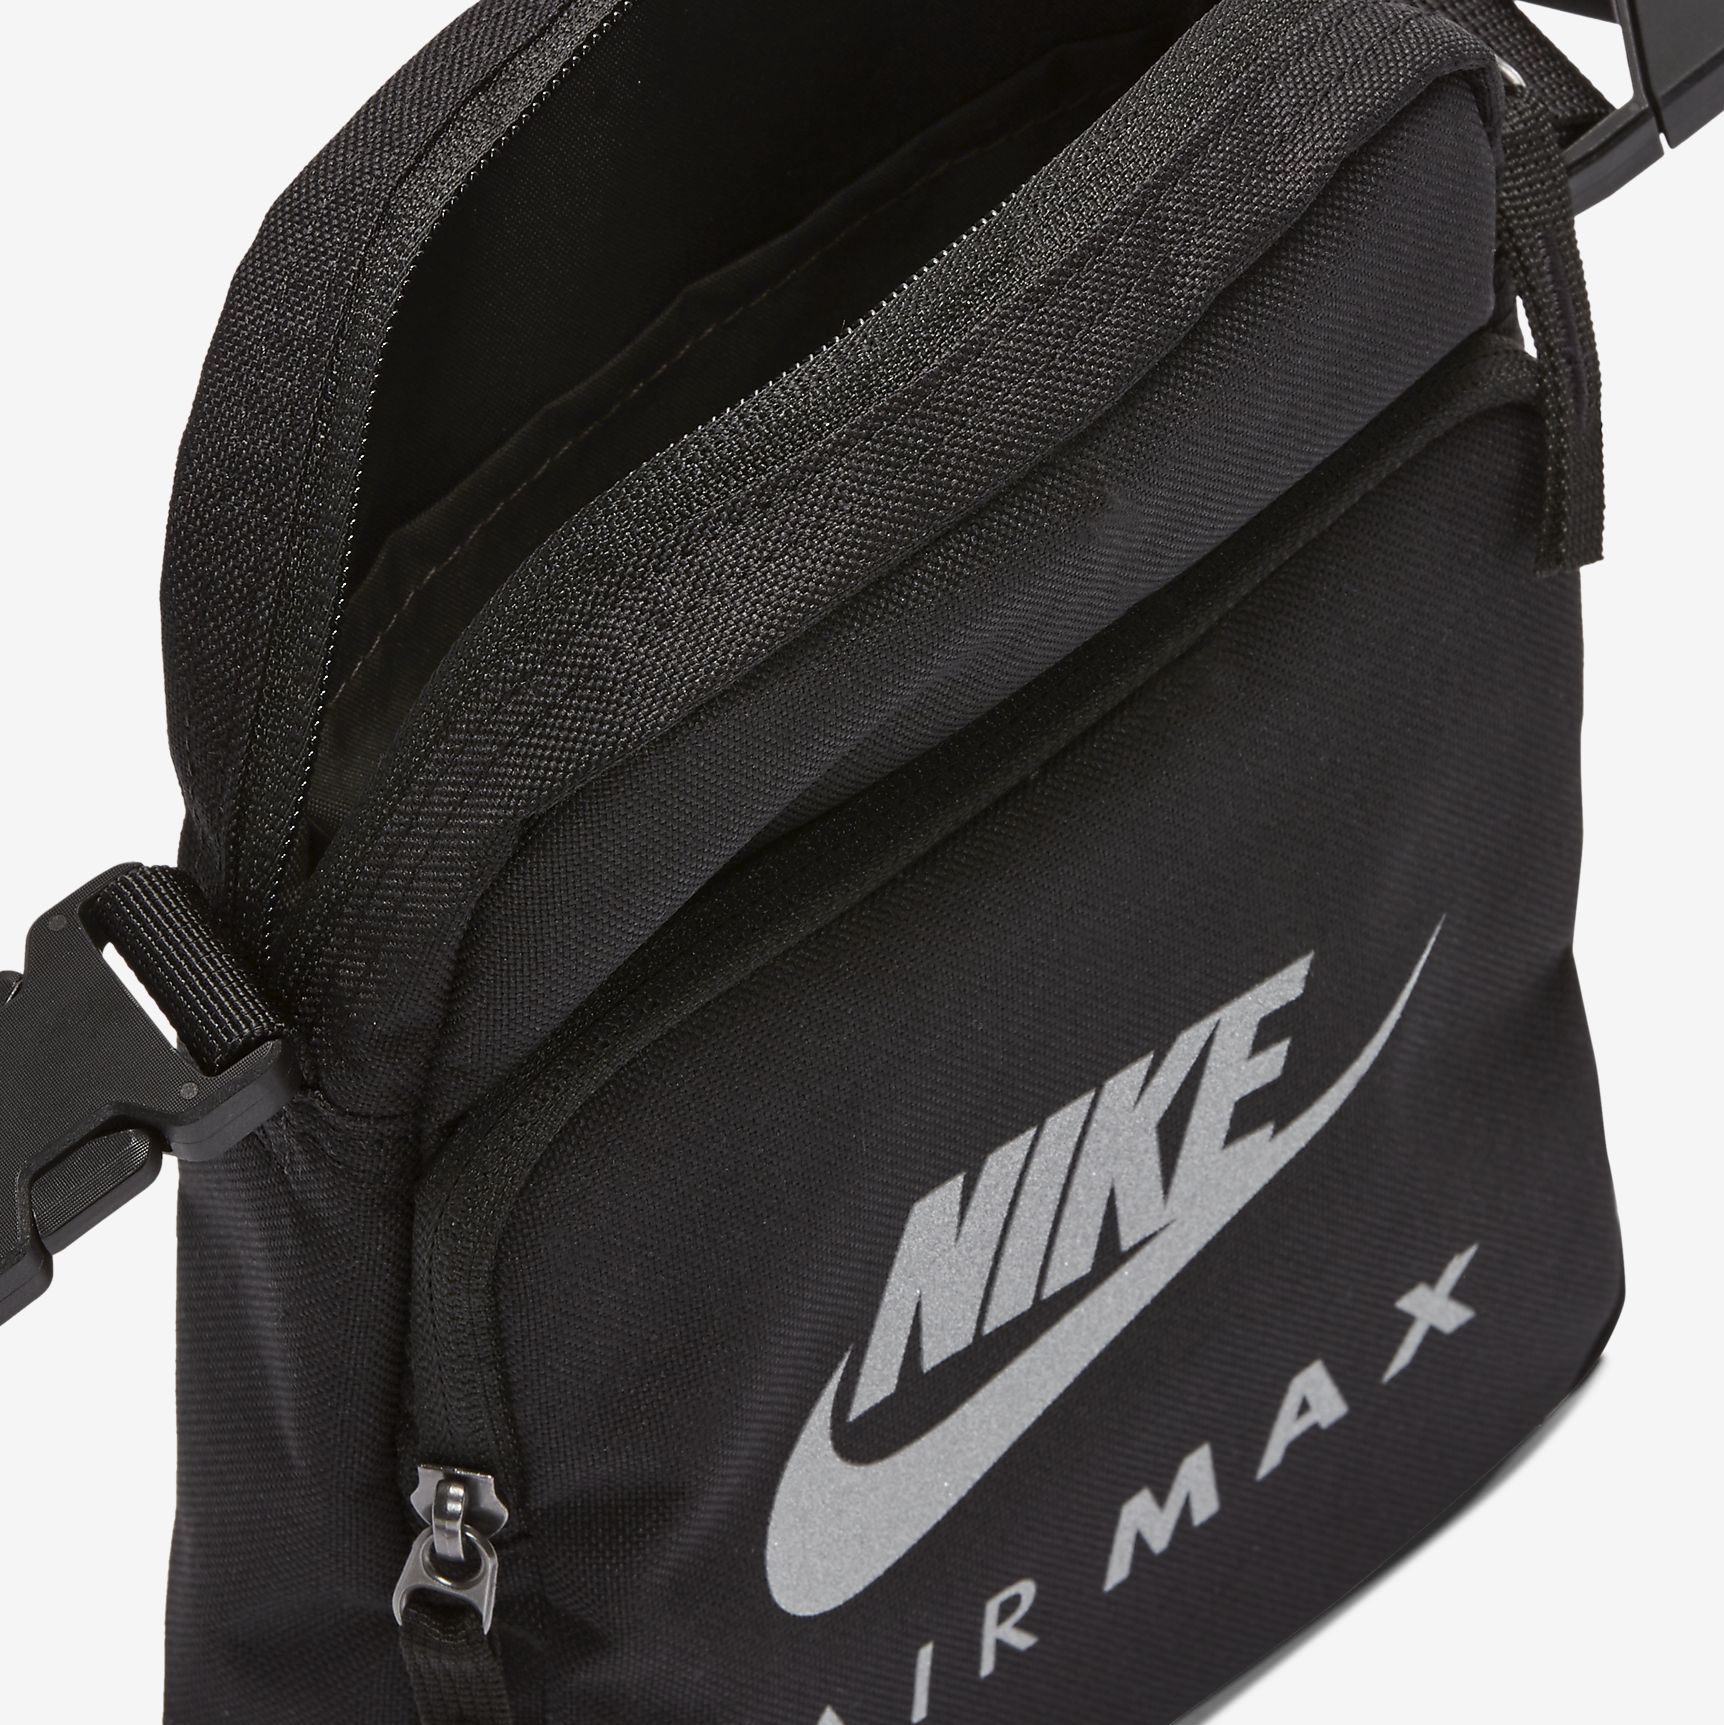 max sling bags online